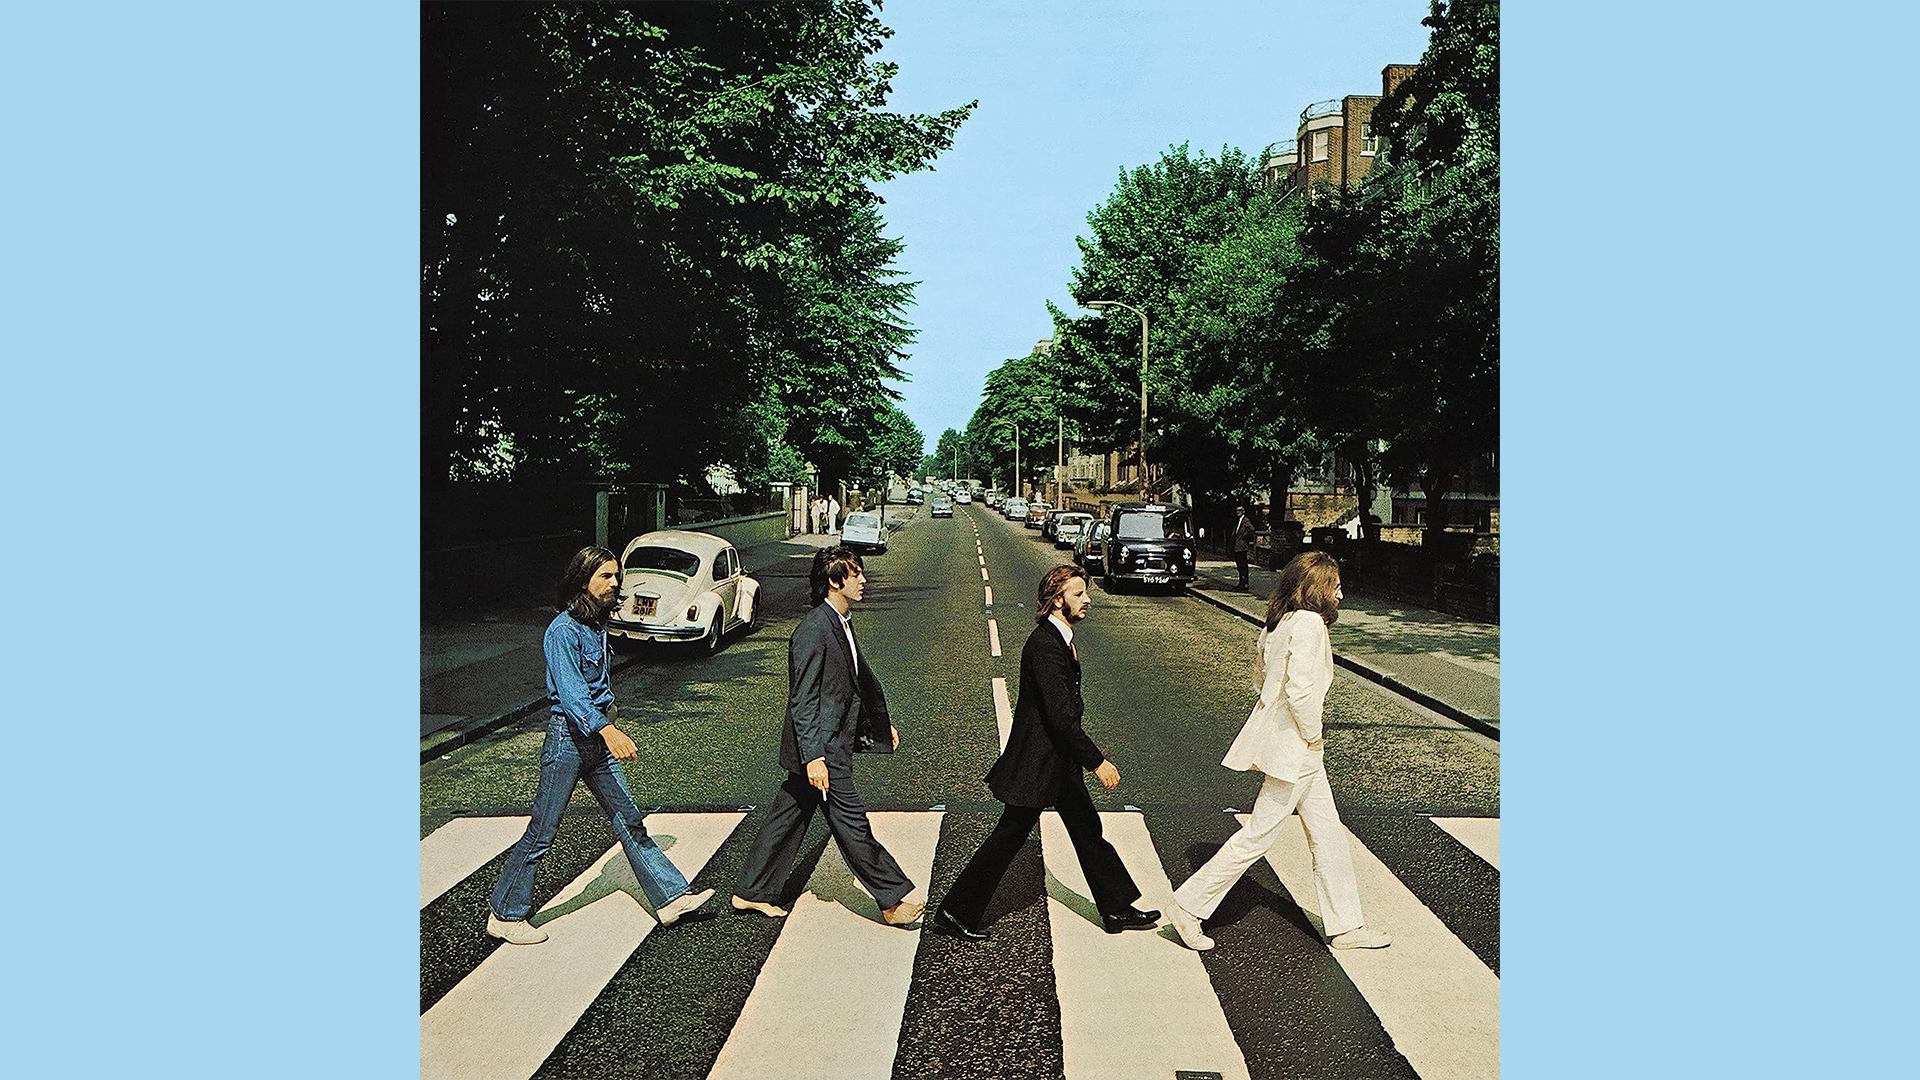 ABBEY ROAD - The Beatles